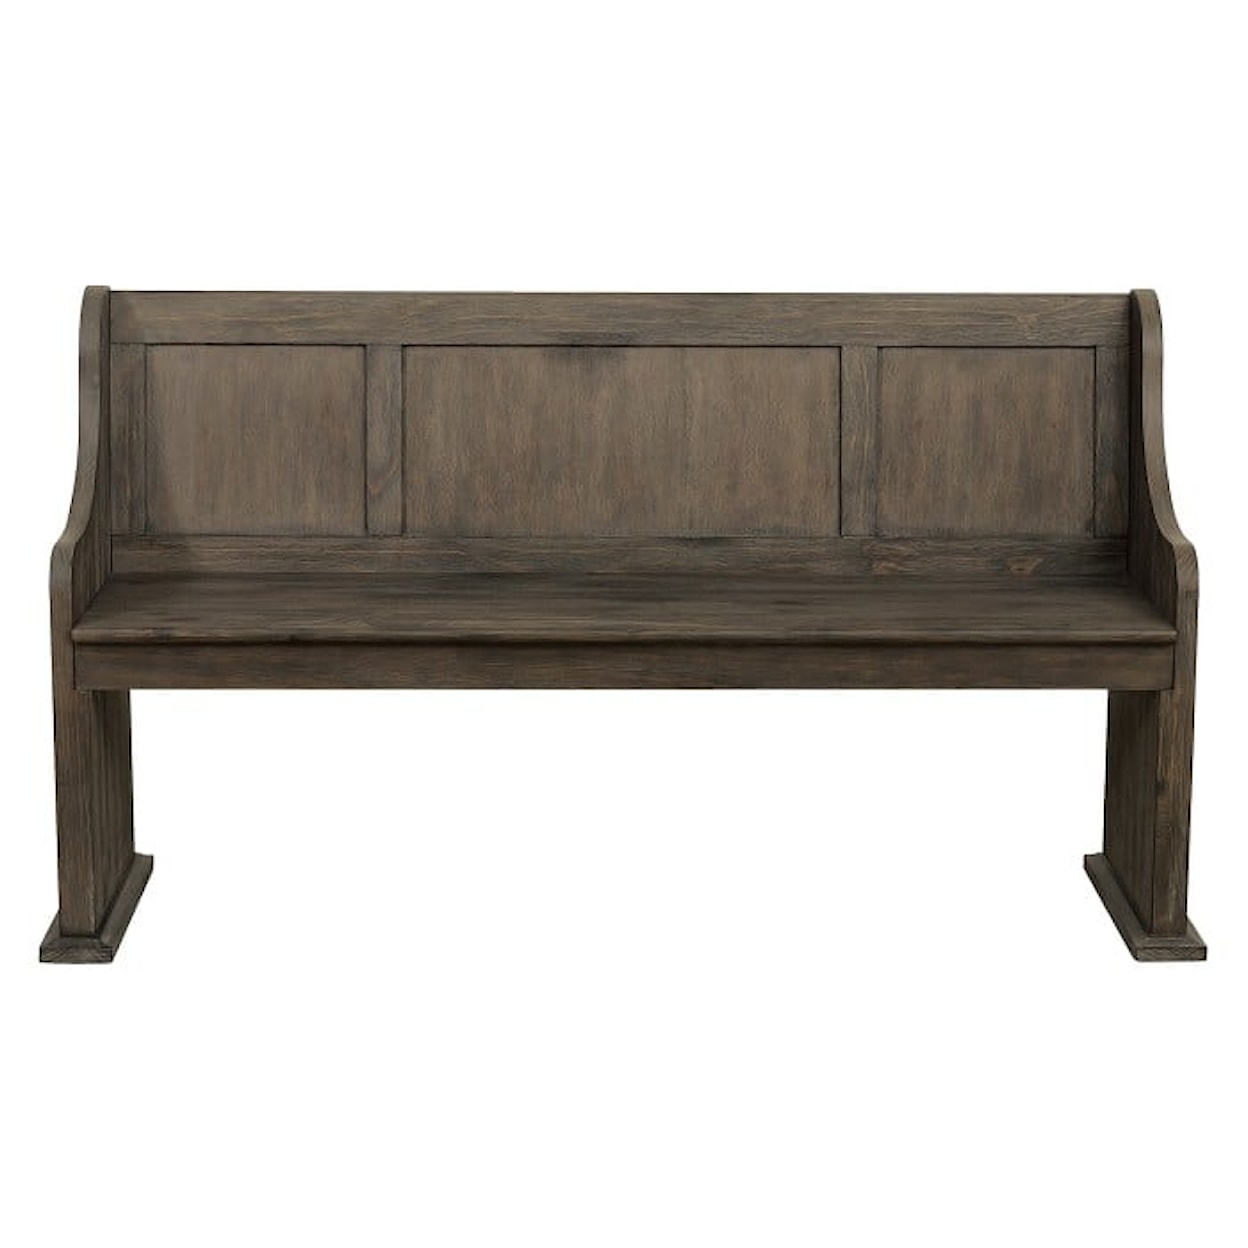 Homelegance Toulon Bench with Curved Arms